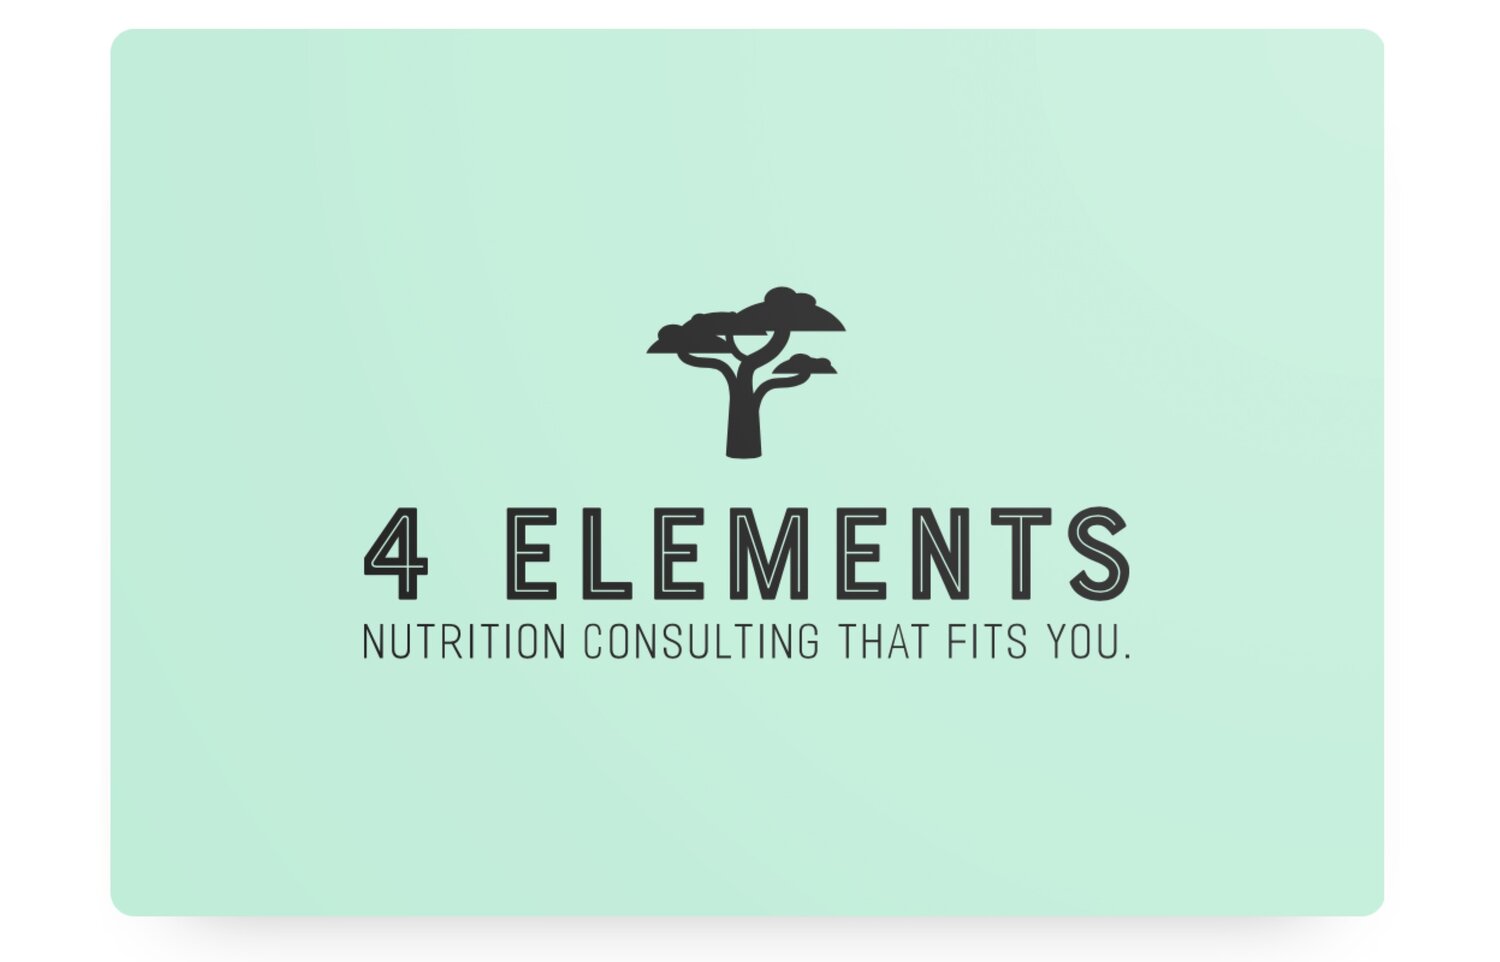 4 Elements Nutrition Consulting